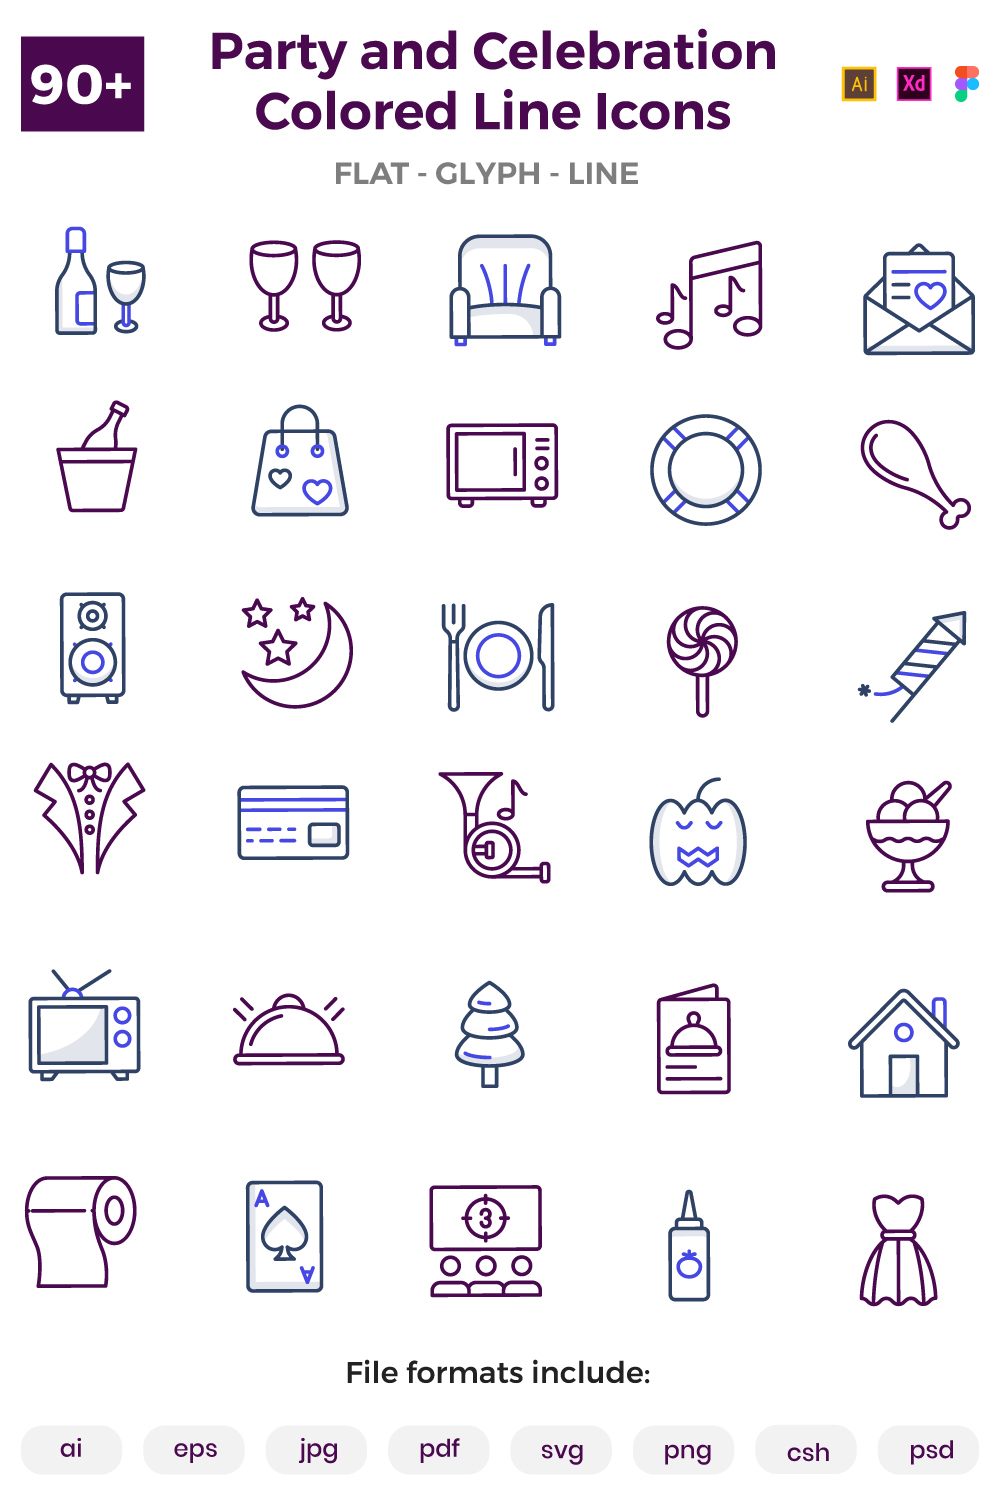 90+ Party and Celebration Colored Line Icons pinterest preview image.